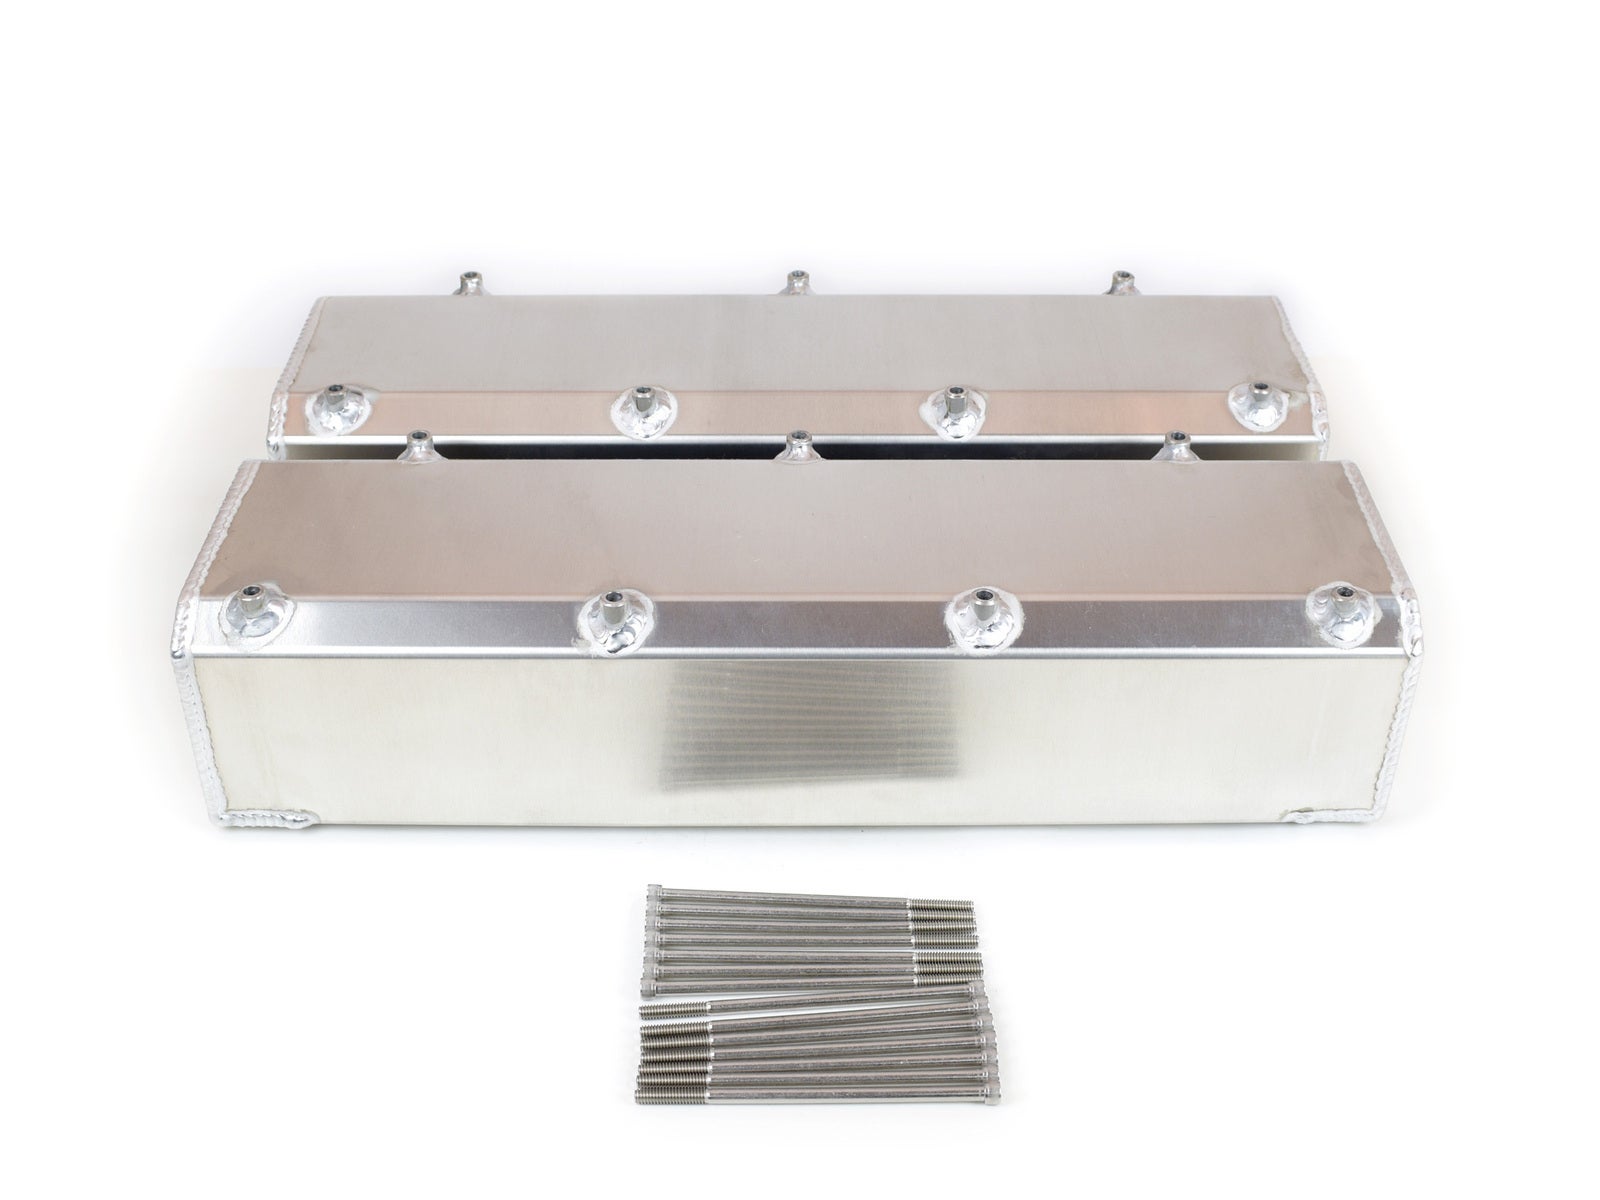 Canton Fabricated Aluminum Valve Cover For 460 Ford Big Block Ford Galaxie 500 1971 CN65385